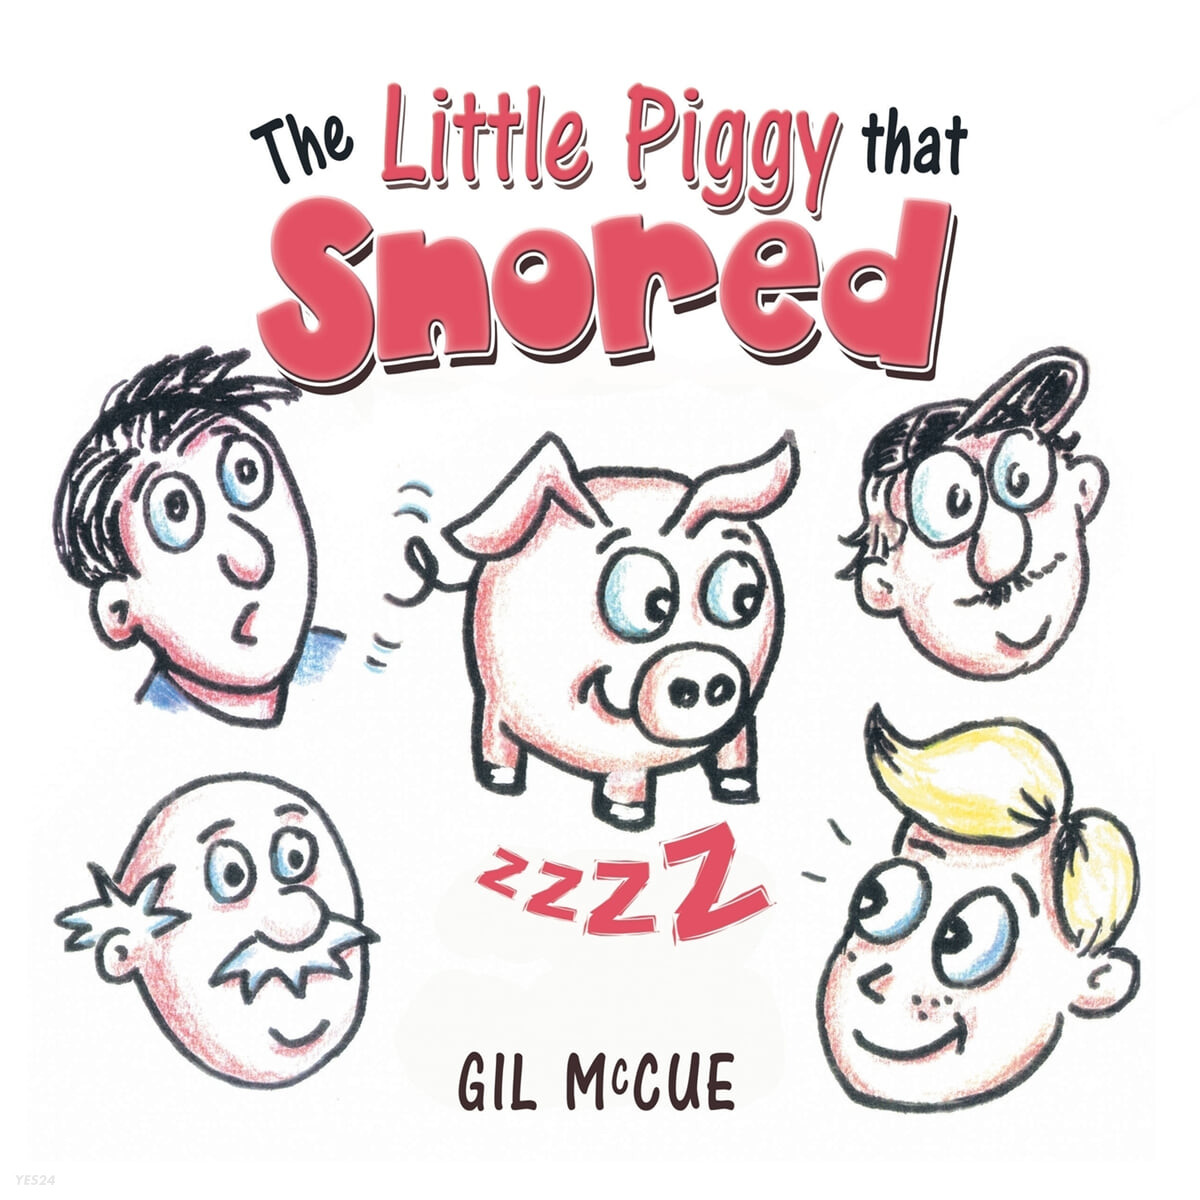 The Little Piggy That Snored